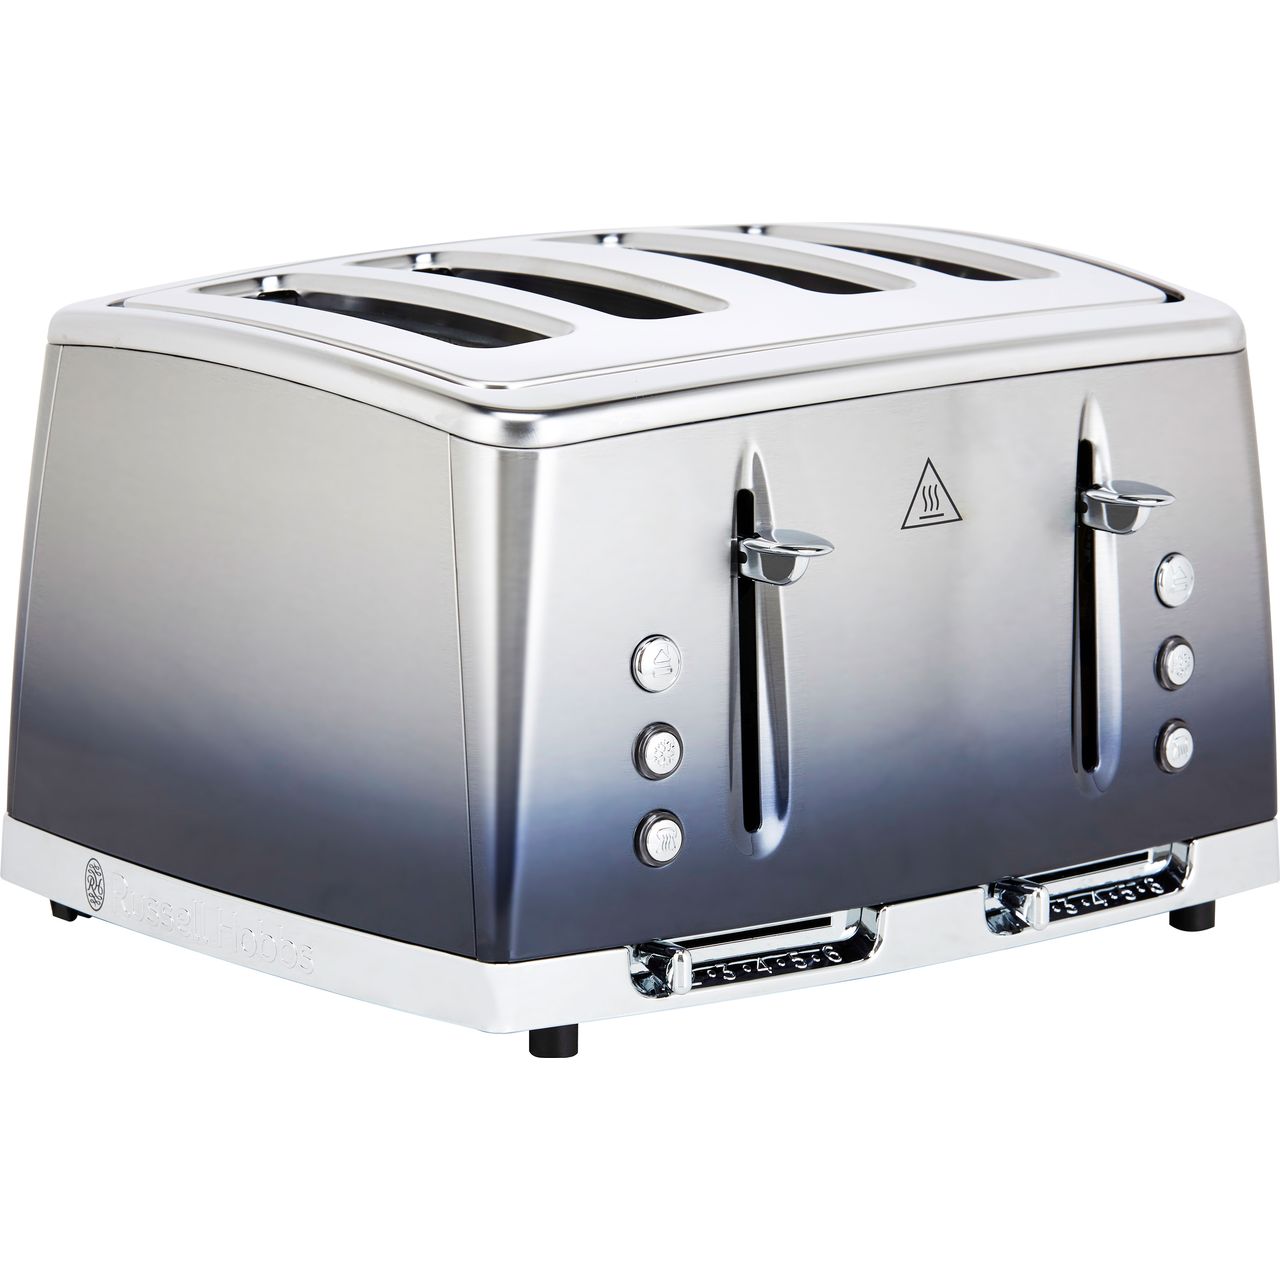 Russell Hobbs Eclipse 25141 4 Slice Toaster Review